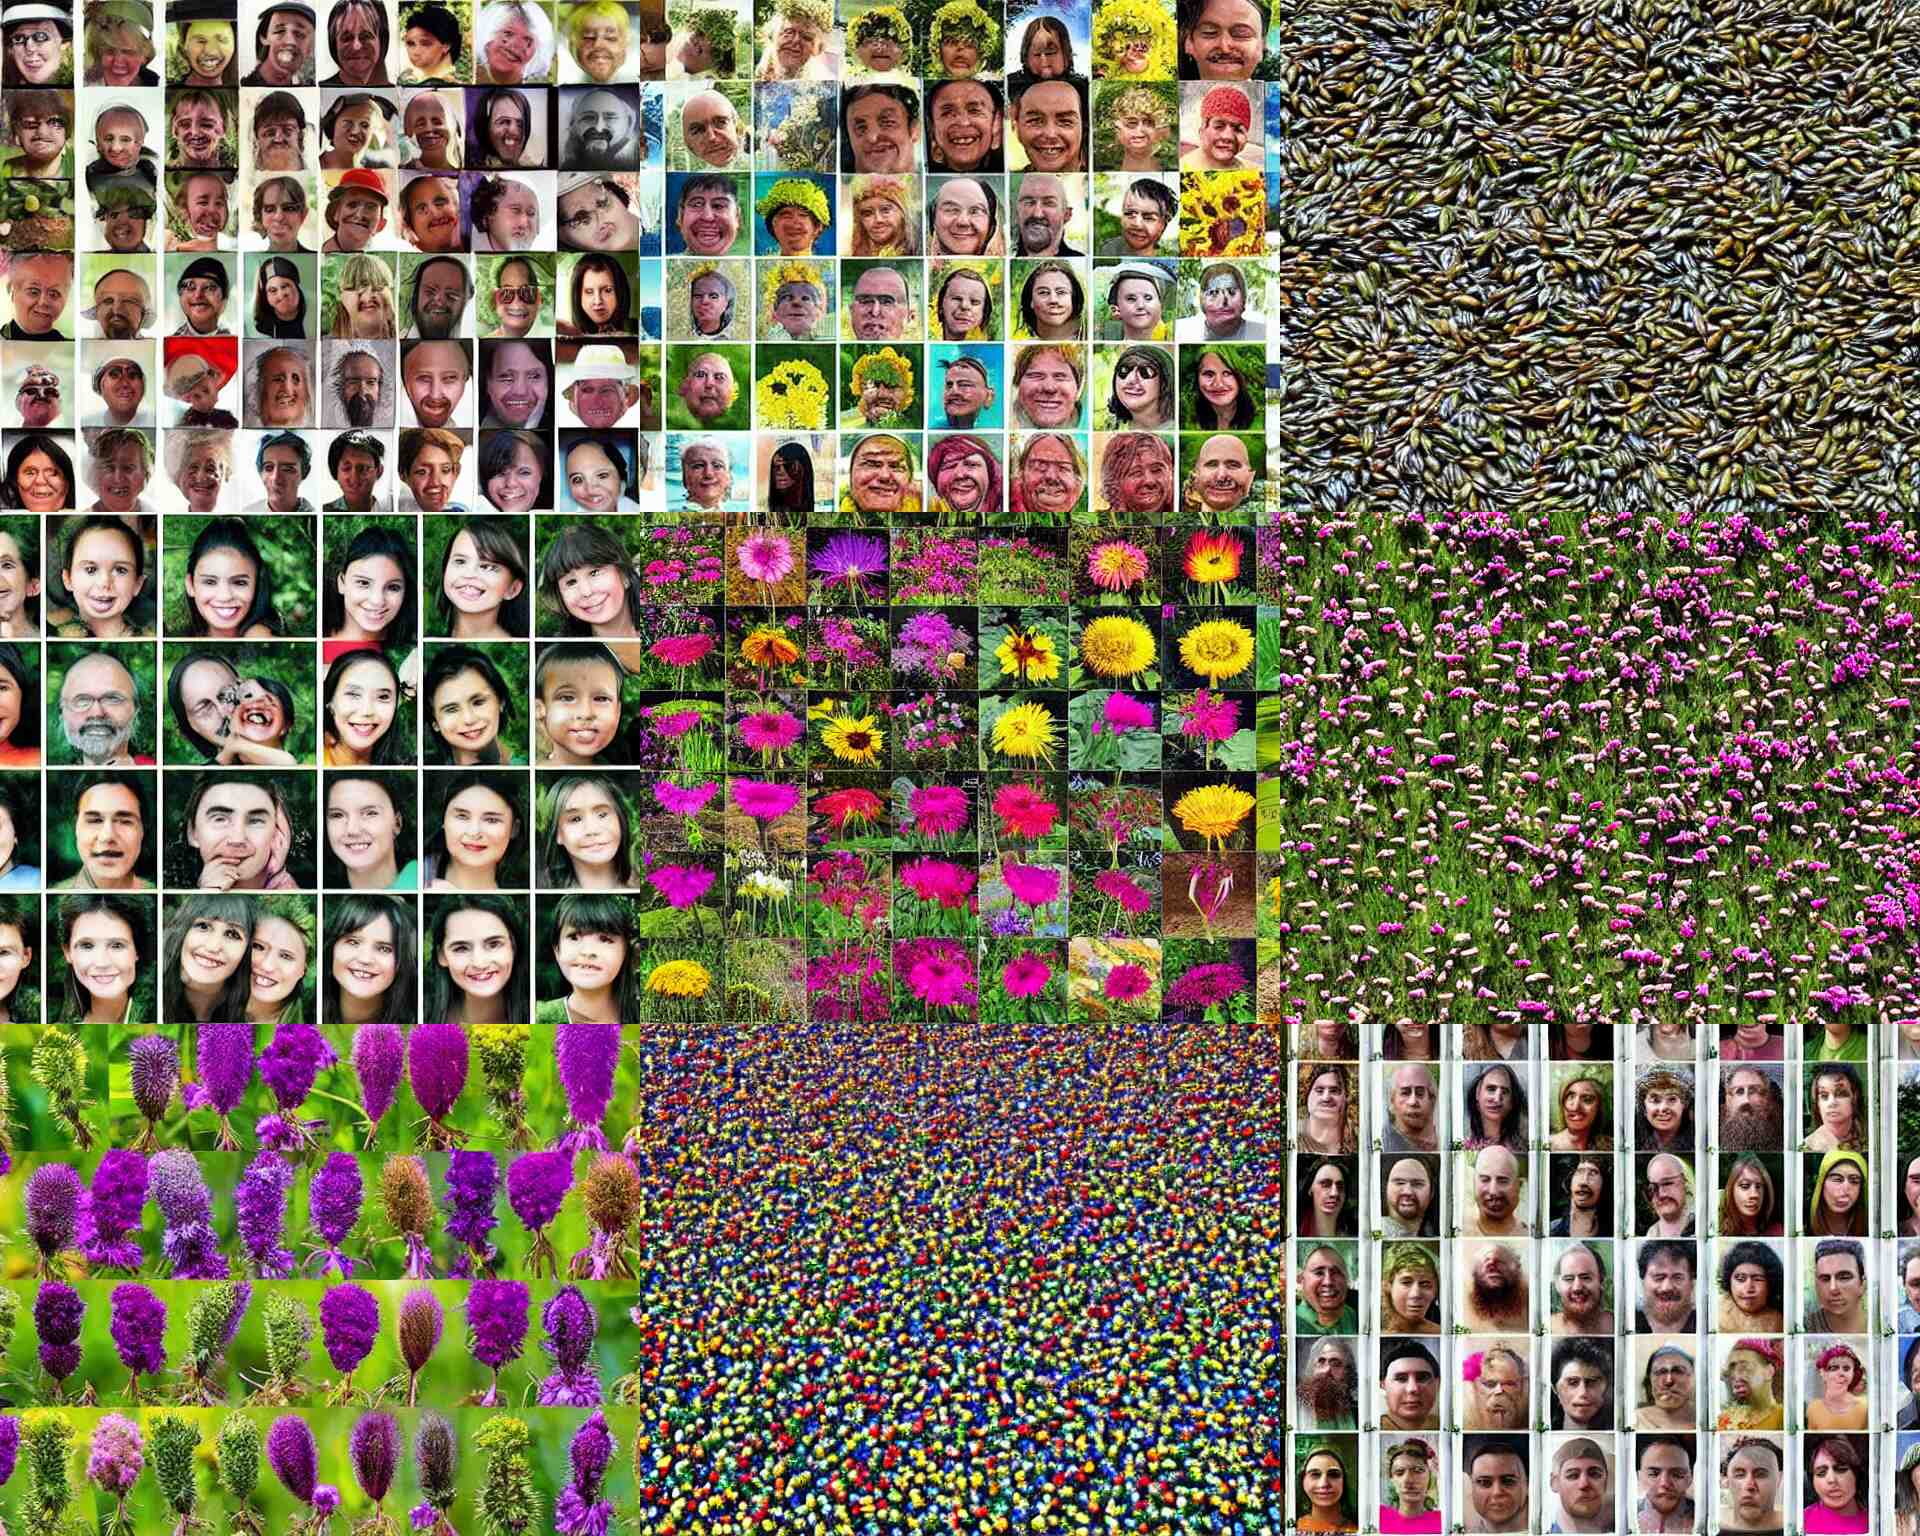 A Guide For Image Processing For Age & Gender Classification API